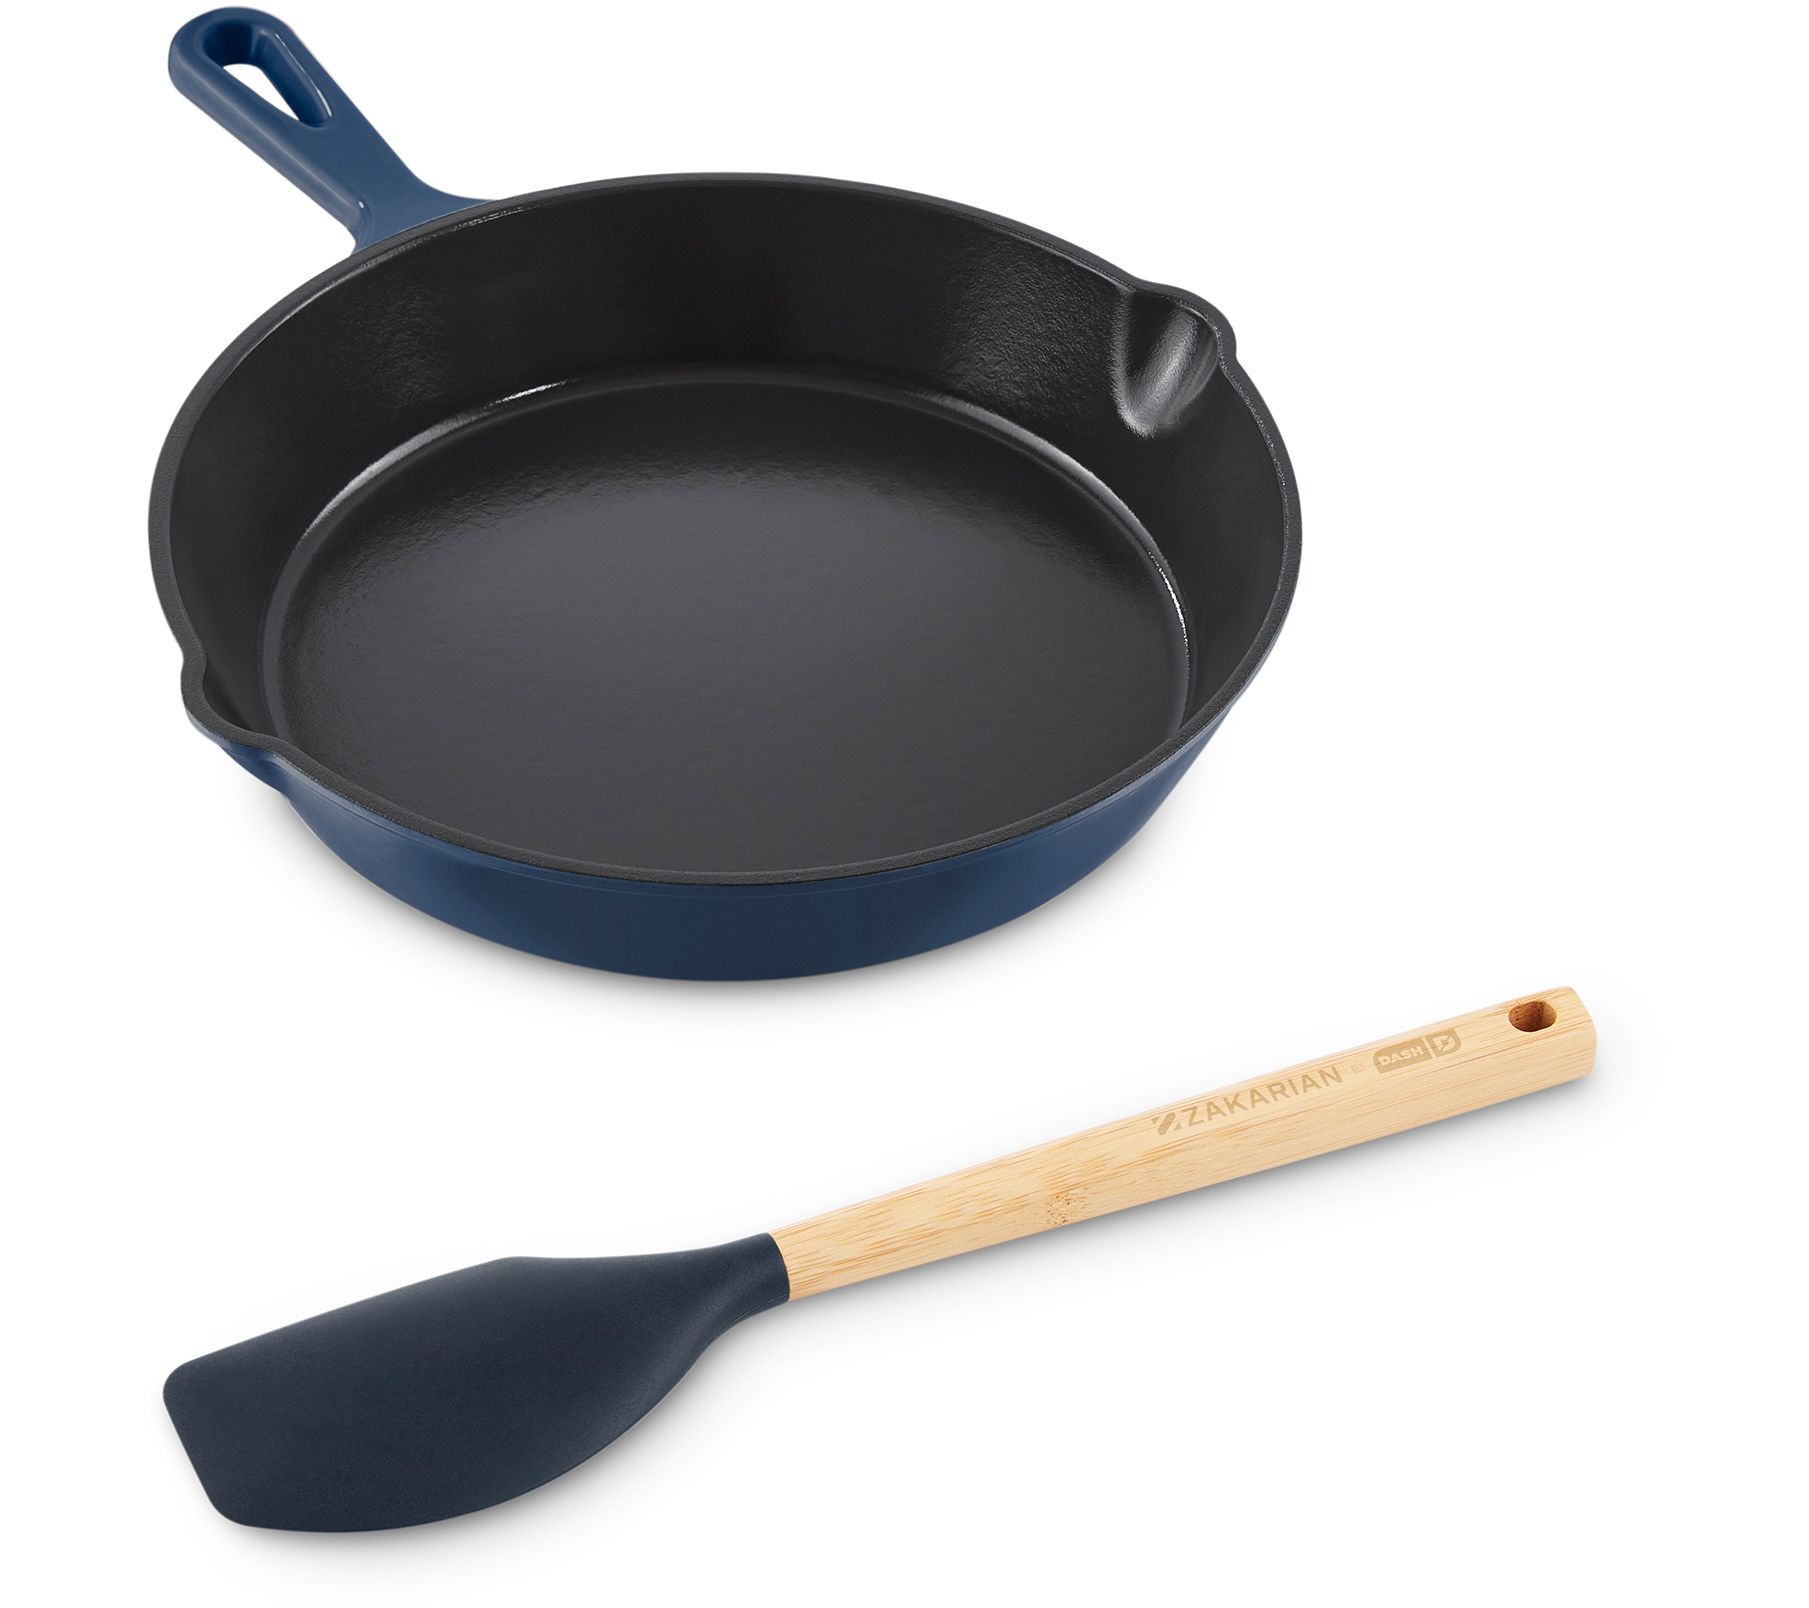 Dash of That 12 inch Enameled Cast Iron Skillet- Blue, 12 in